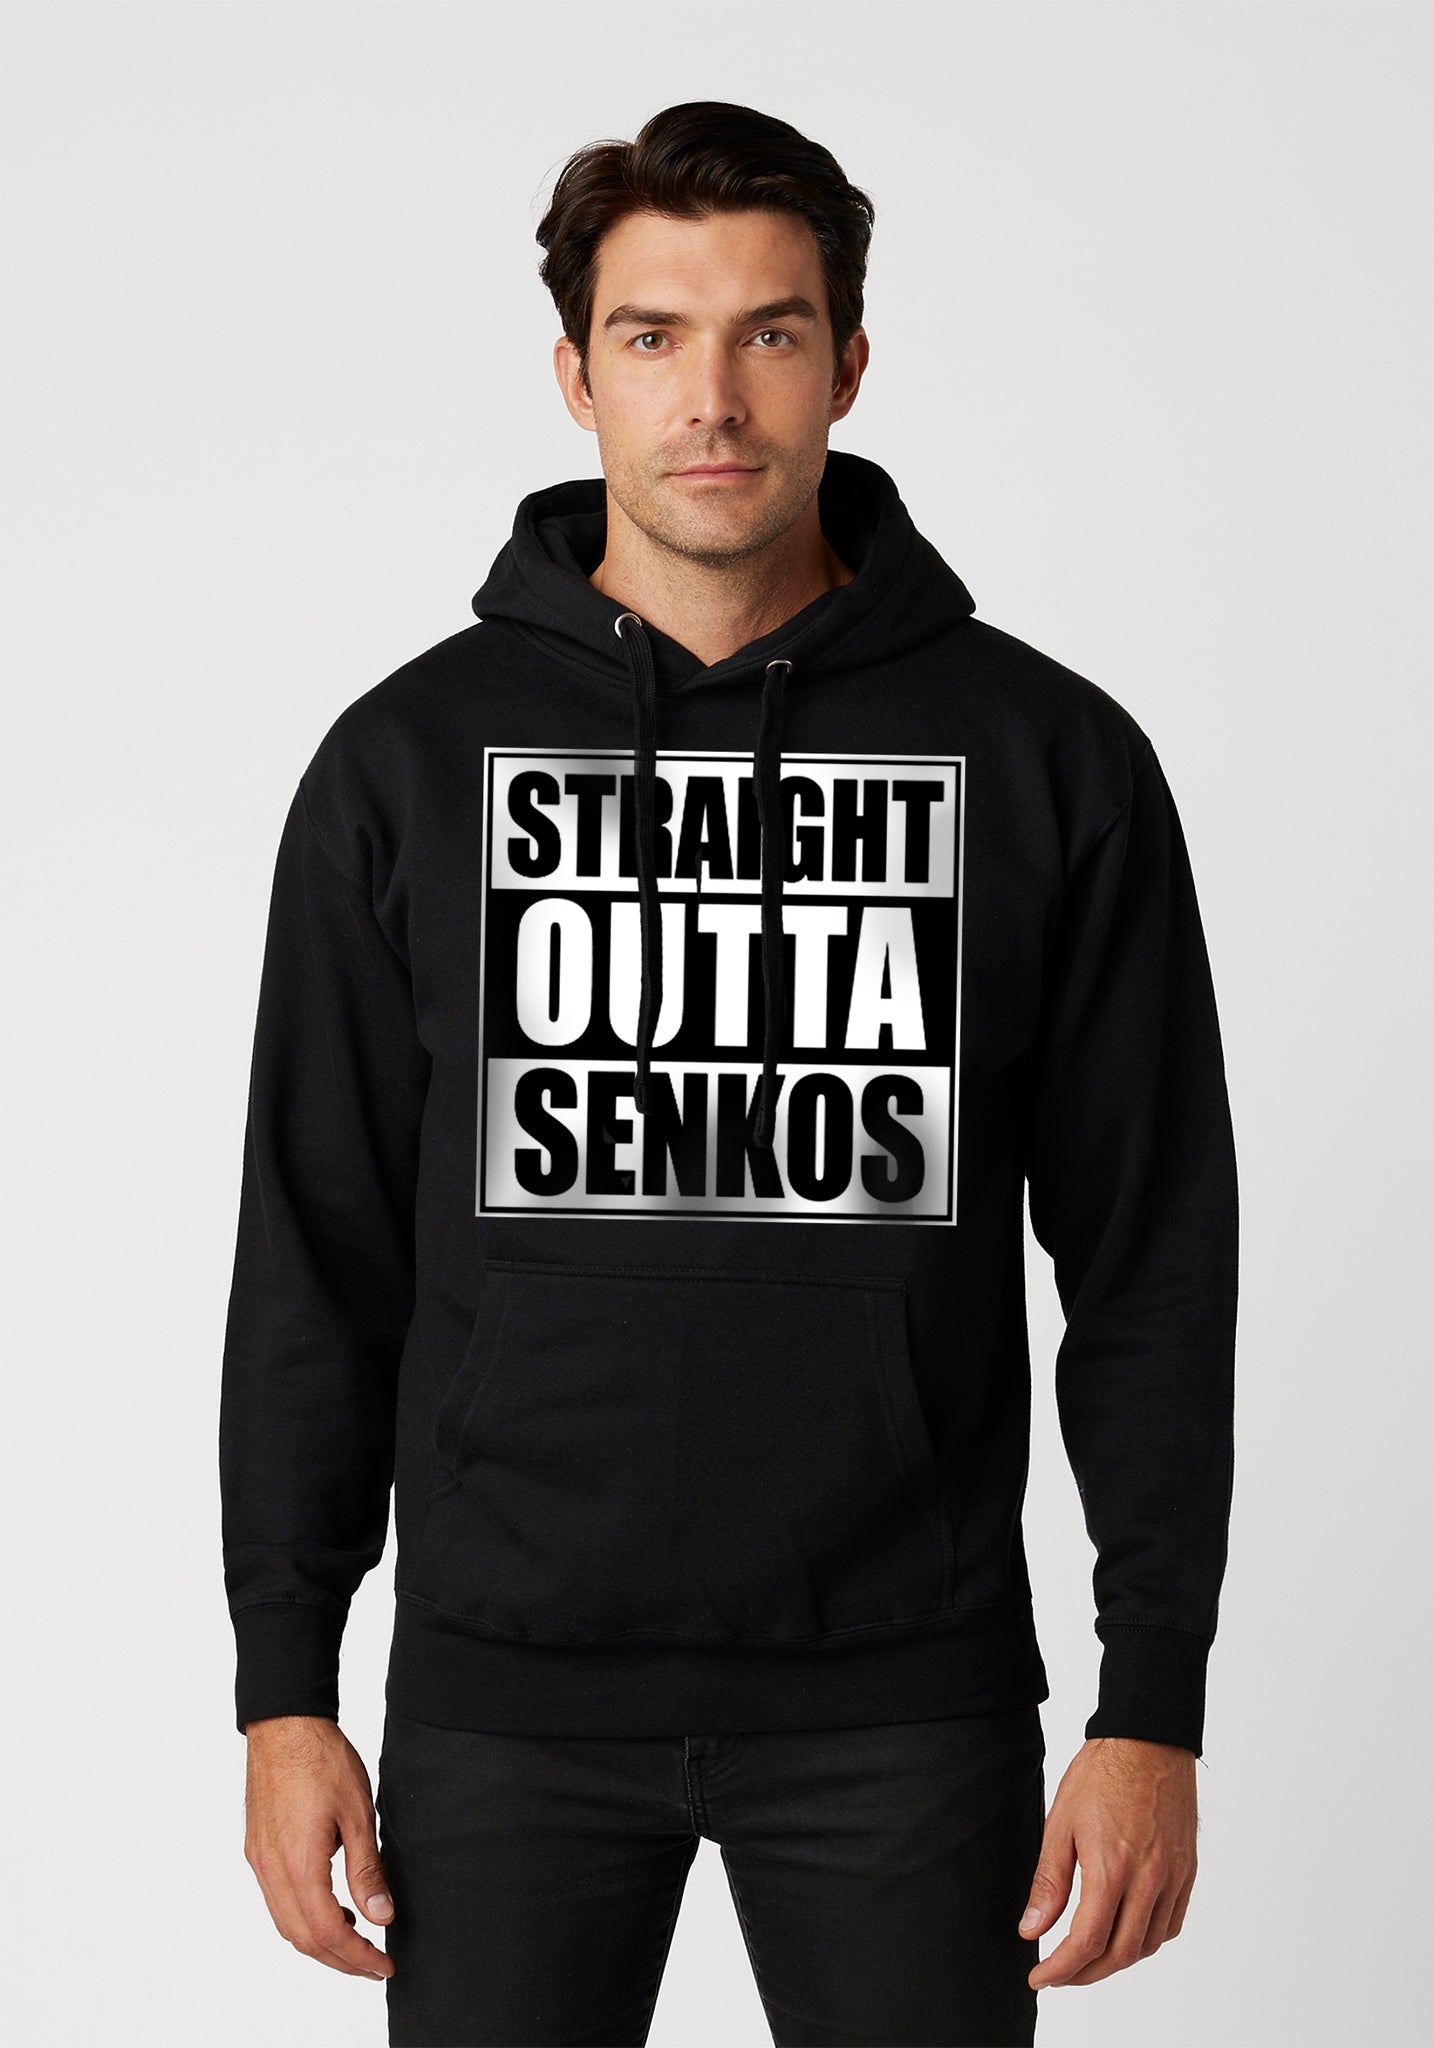 Straight outta Senkos Hoodie by IF